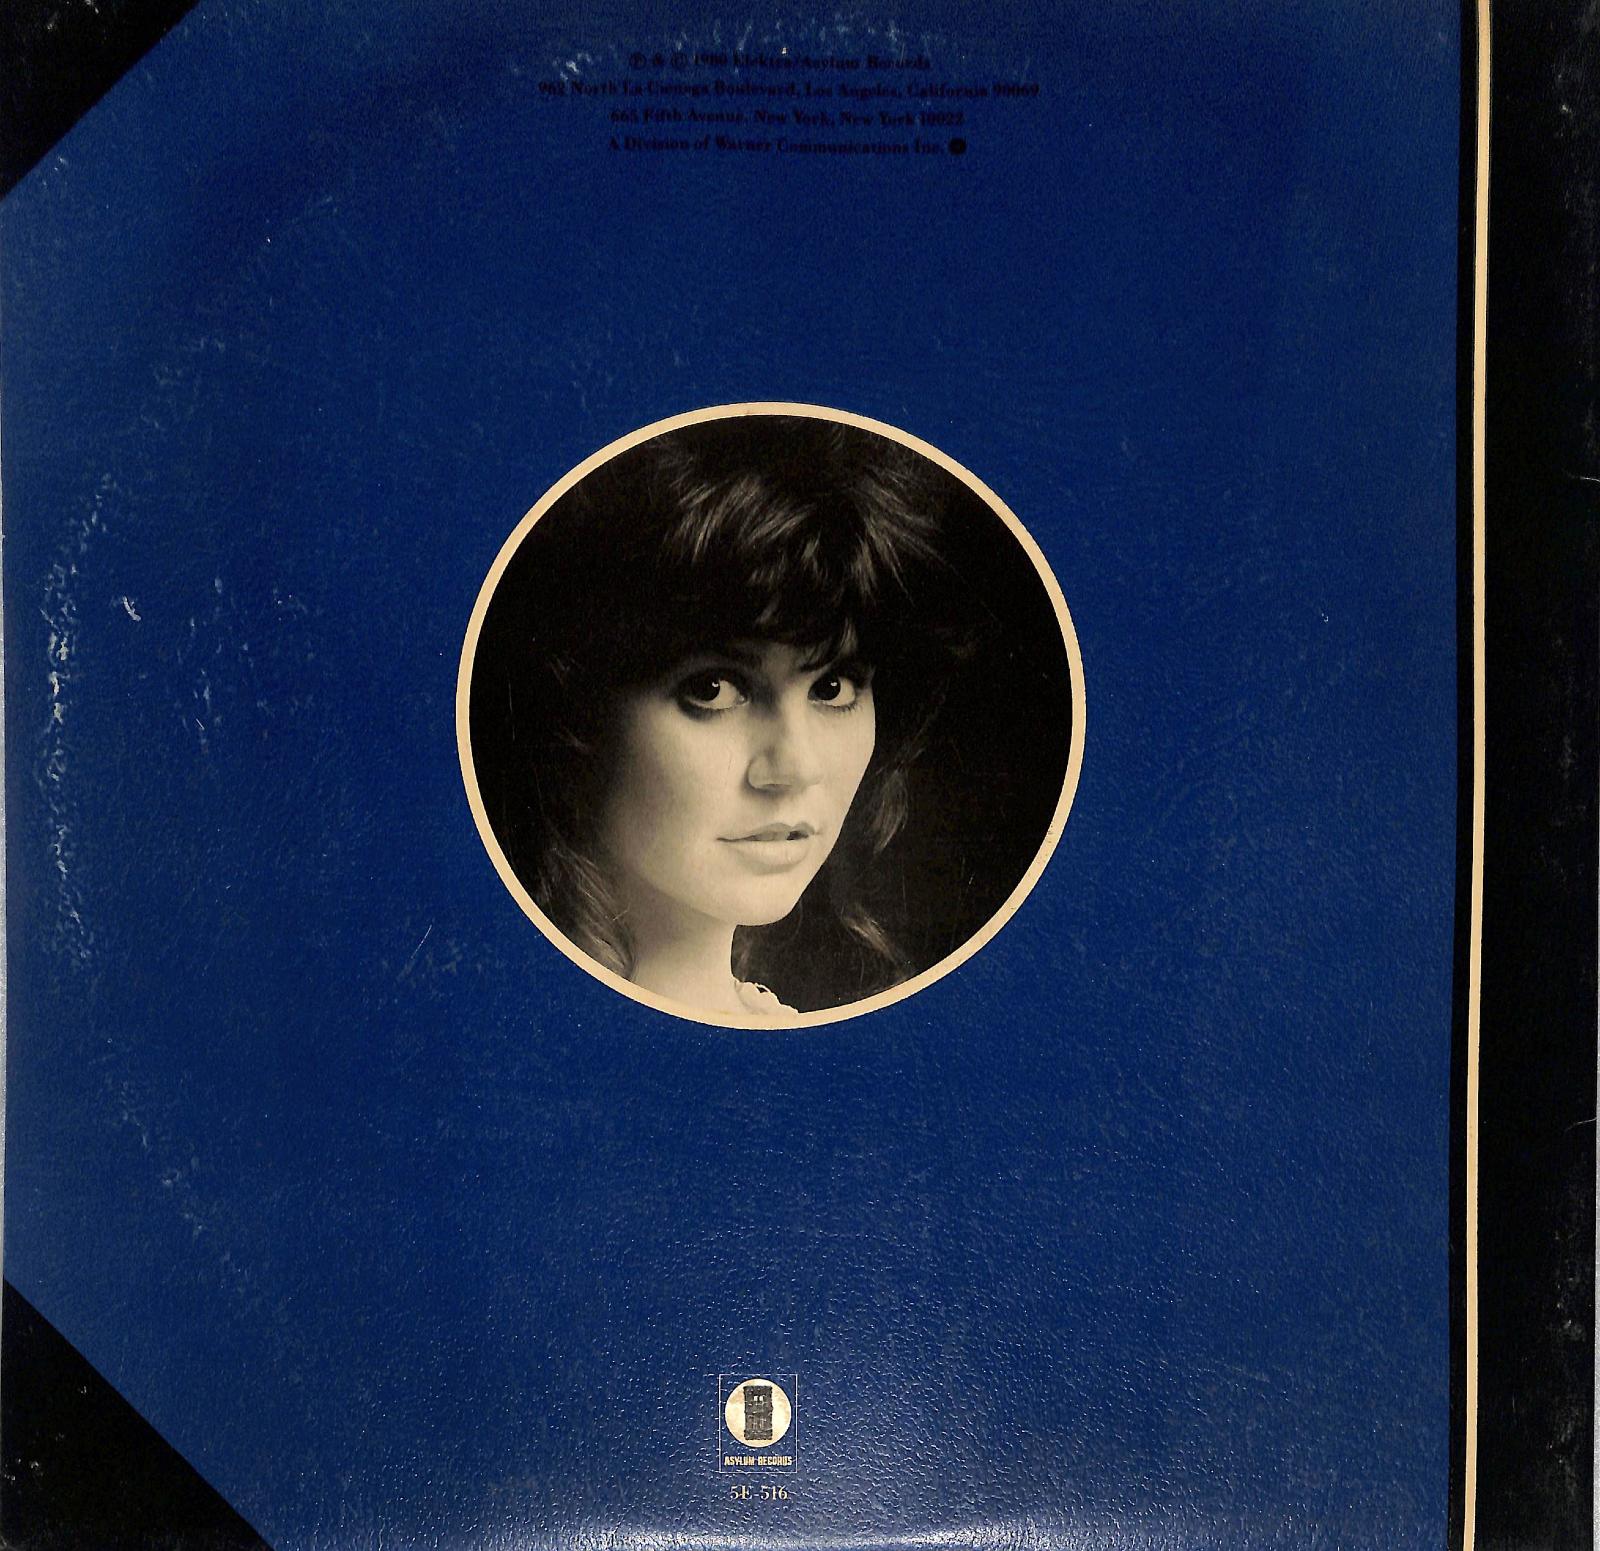 LINDA RONSTADT - Greatest Hits Volume Two